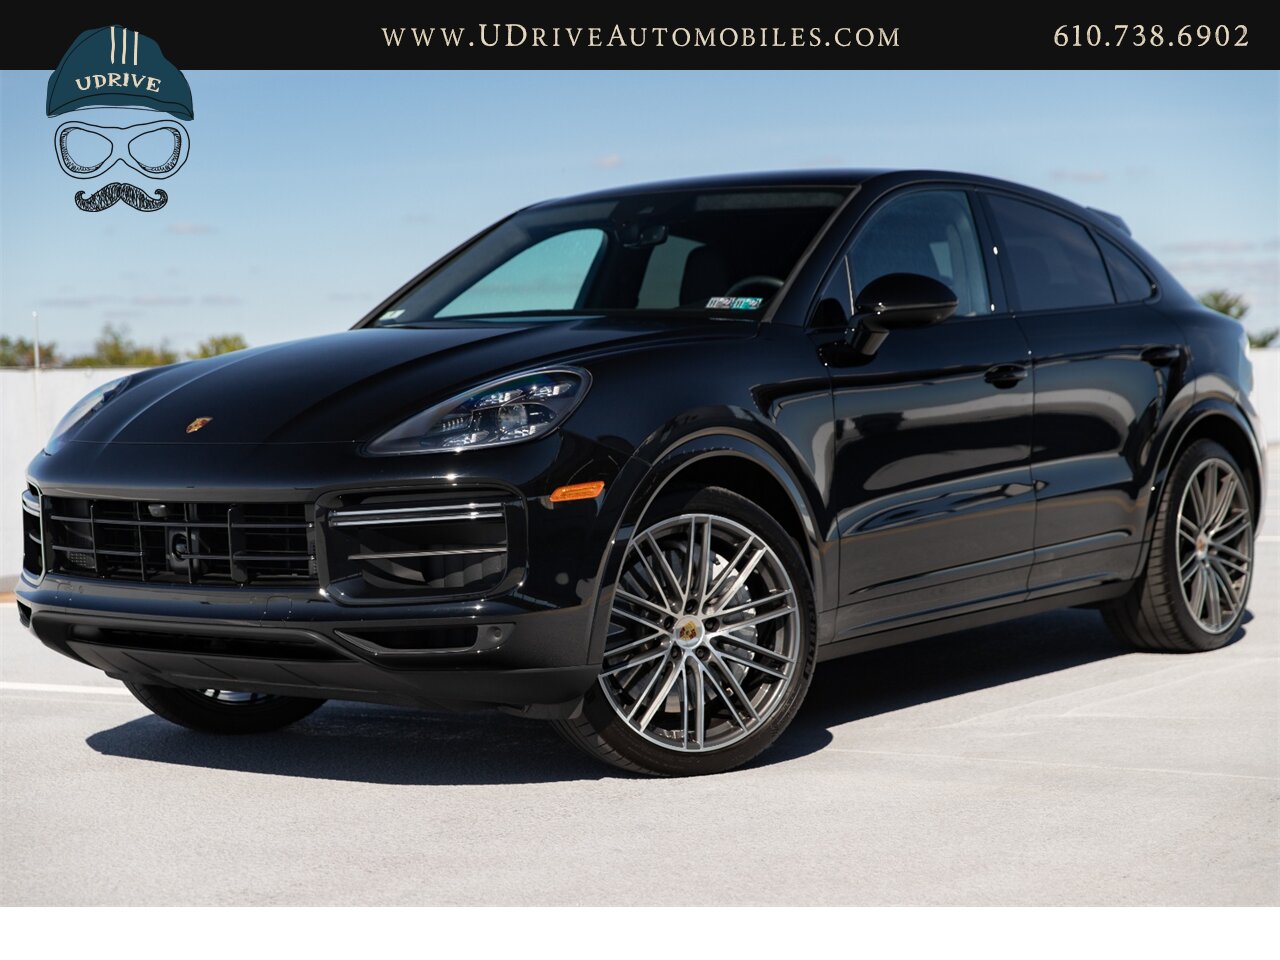 2020 Porsche Cayenne Turbo Coupe 2+1 Rear Comf Seats Prem Plus  22in Turbo Design Whls Sport Exhst Adap Cruise Surround View - Photo 1 - West Chester, PA 19382